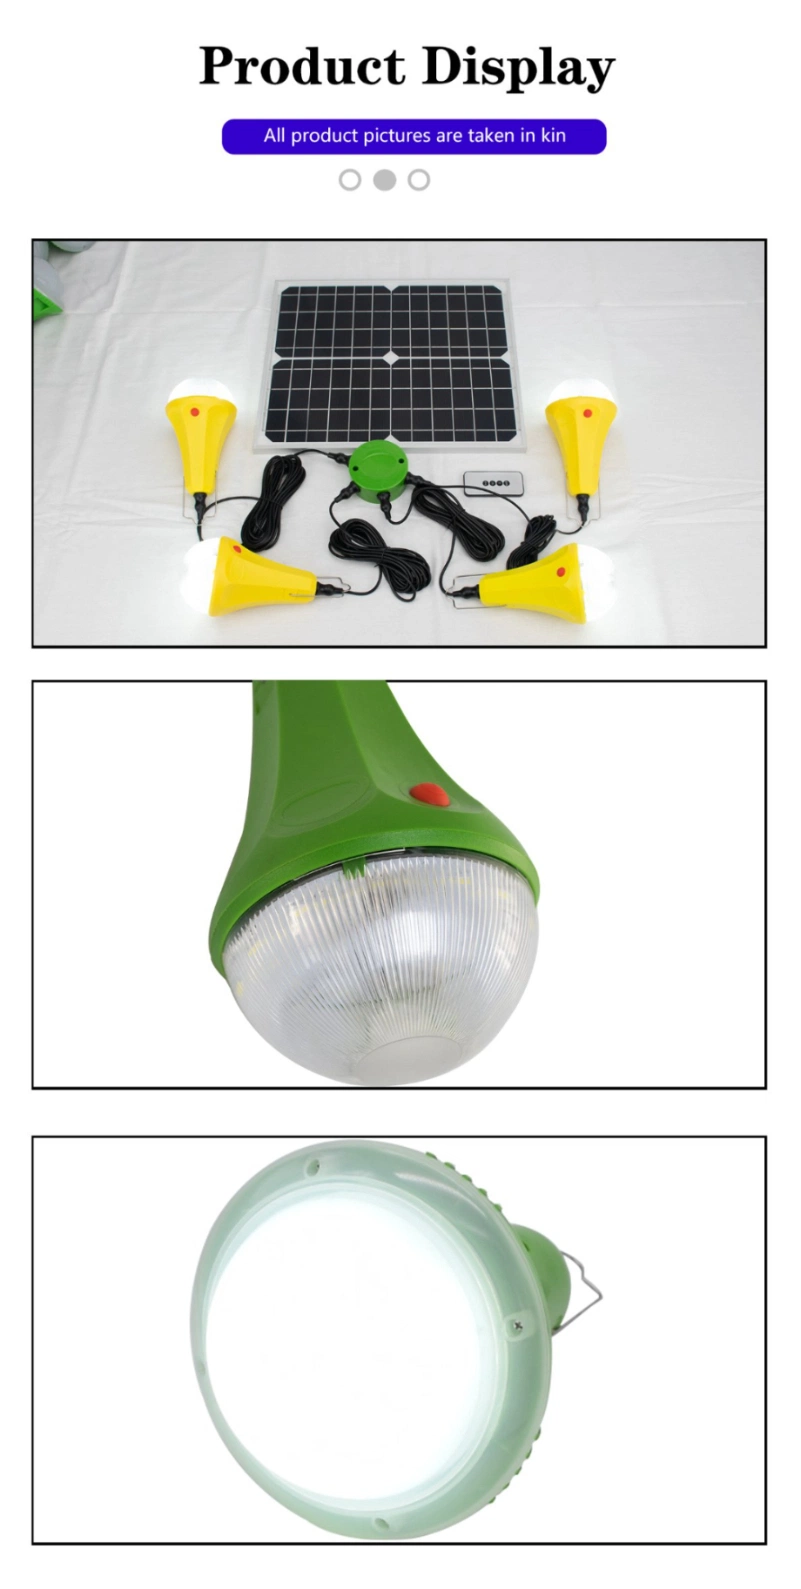 Model No. Sre-98g-4 Solar Light Kits for Camping Enthusiasts Solar Rechargeable Lighting System